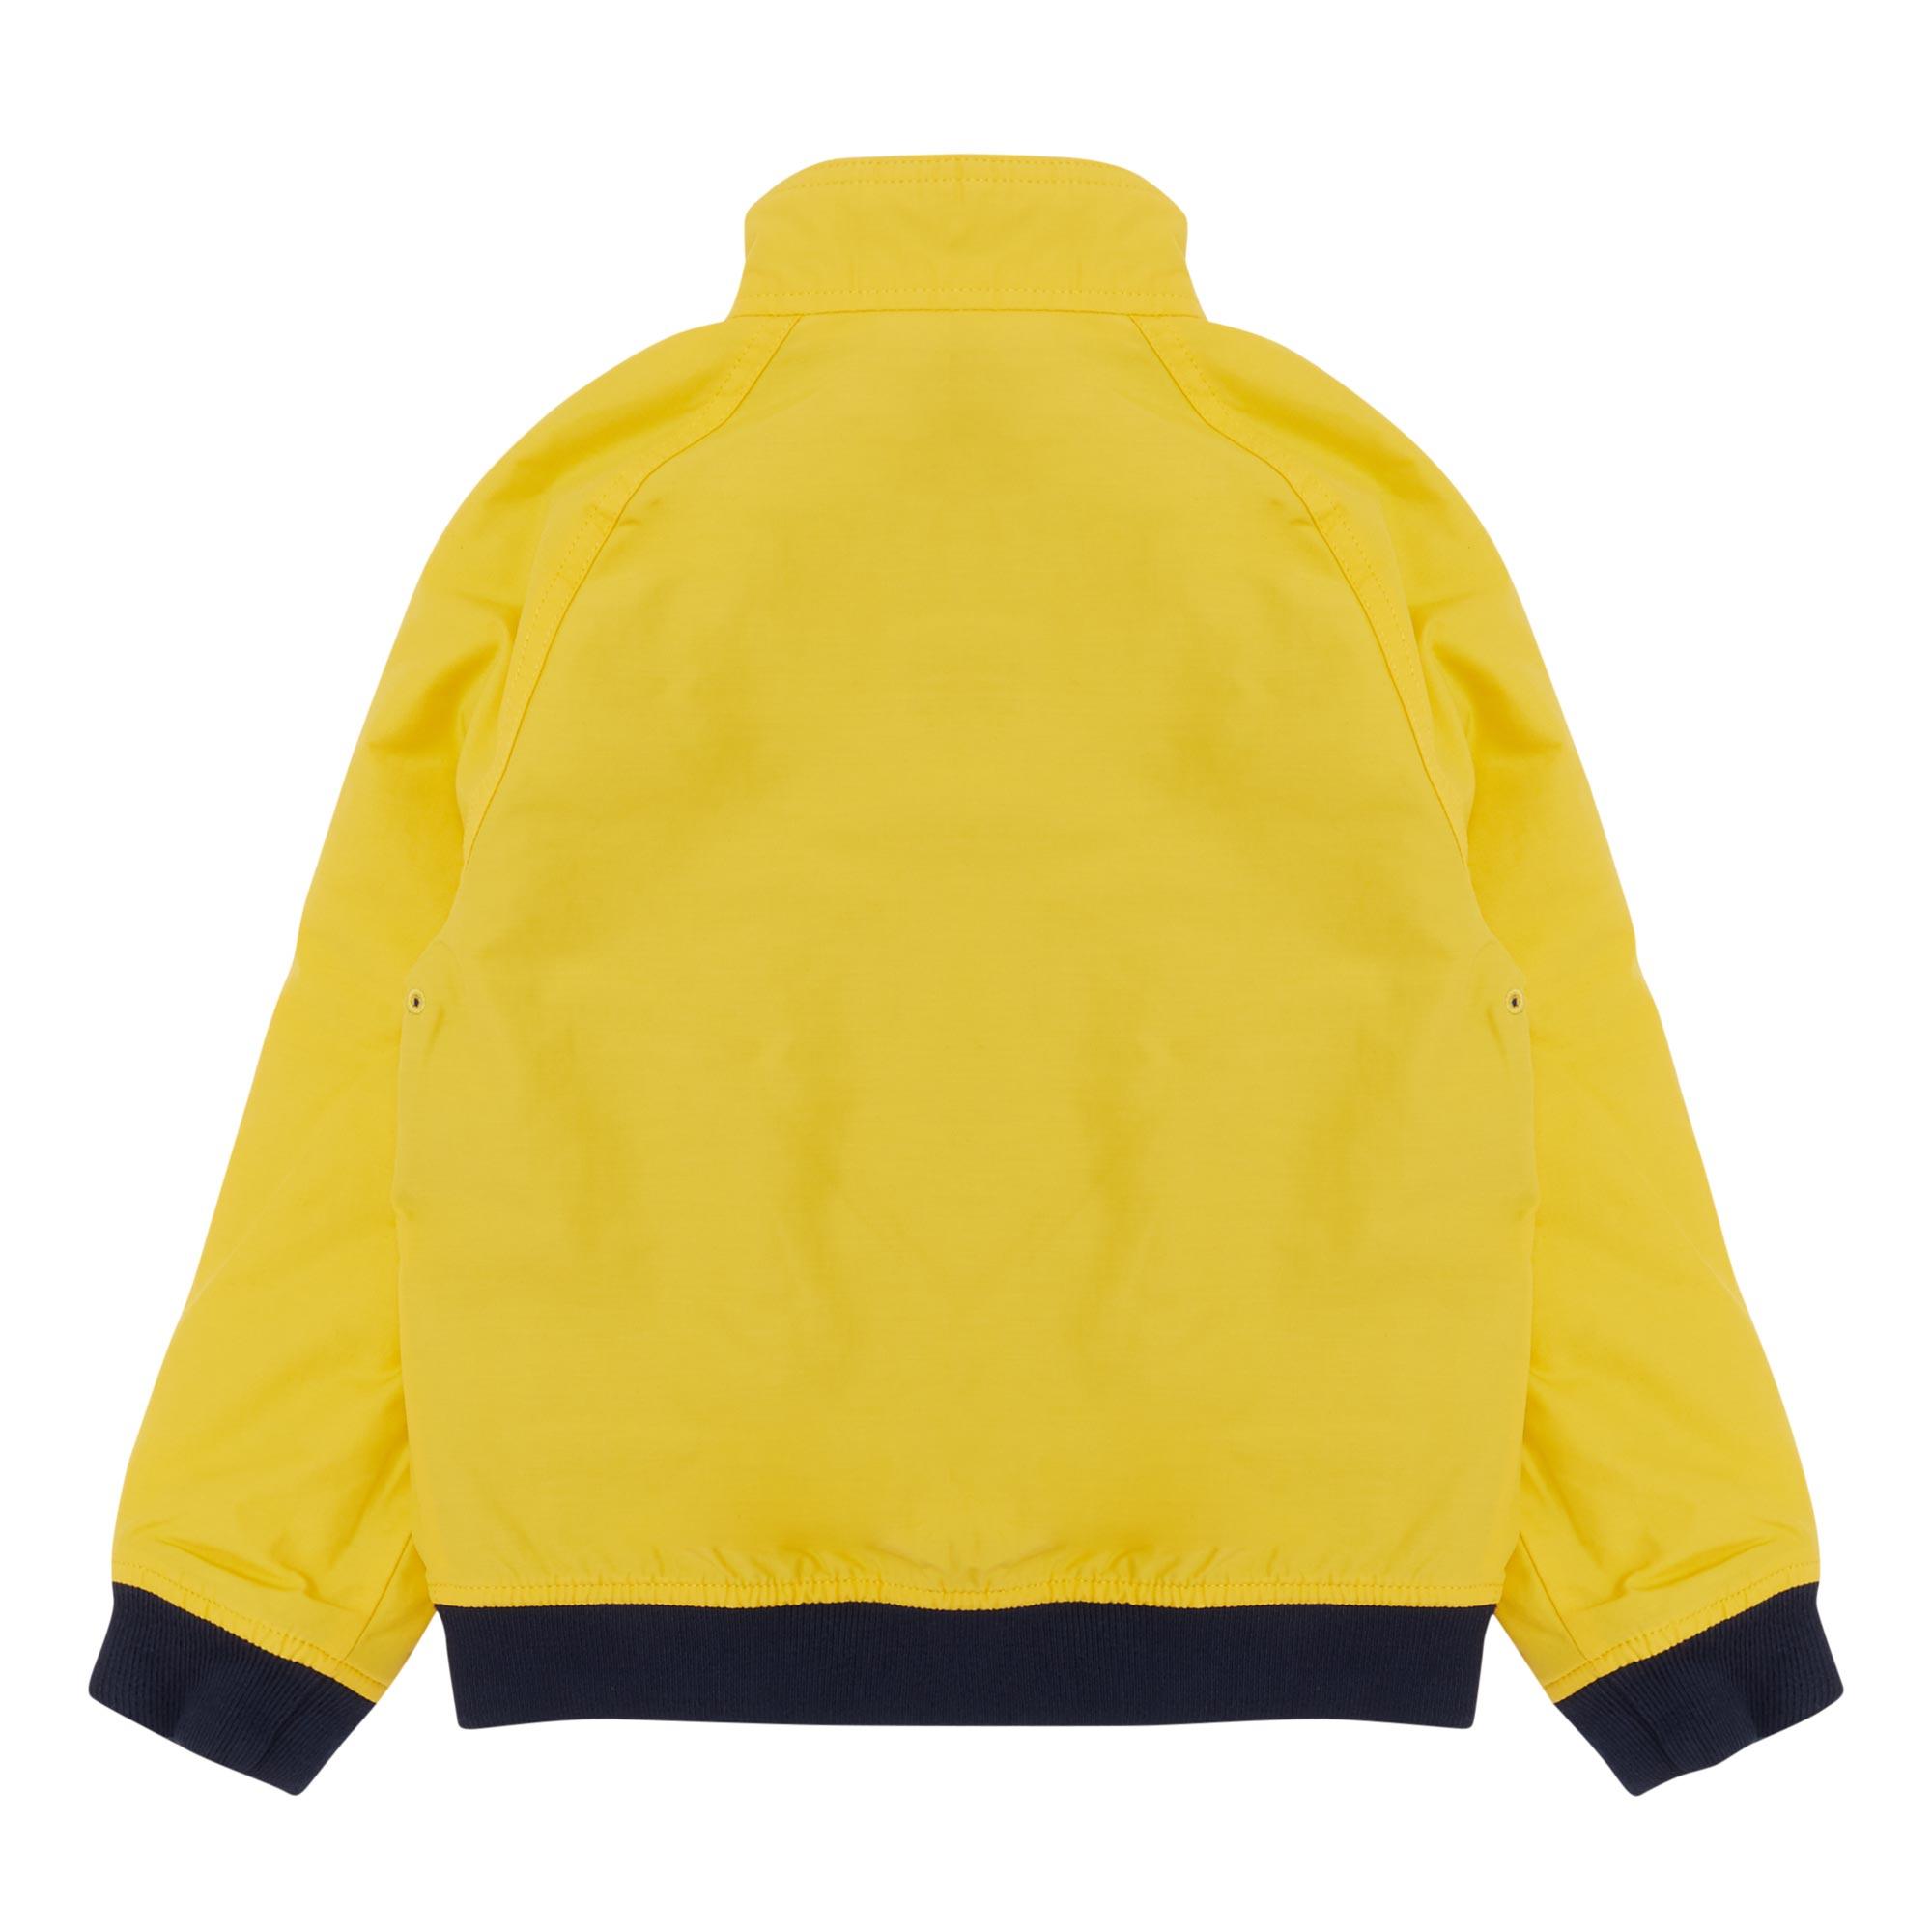 Outer Bomber Jacket